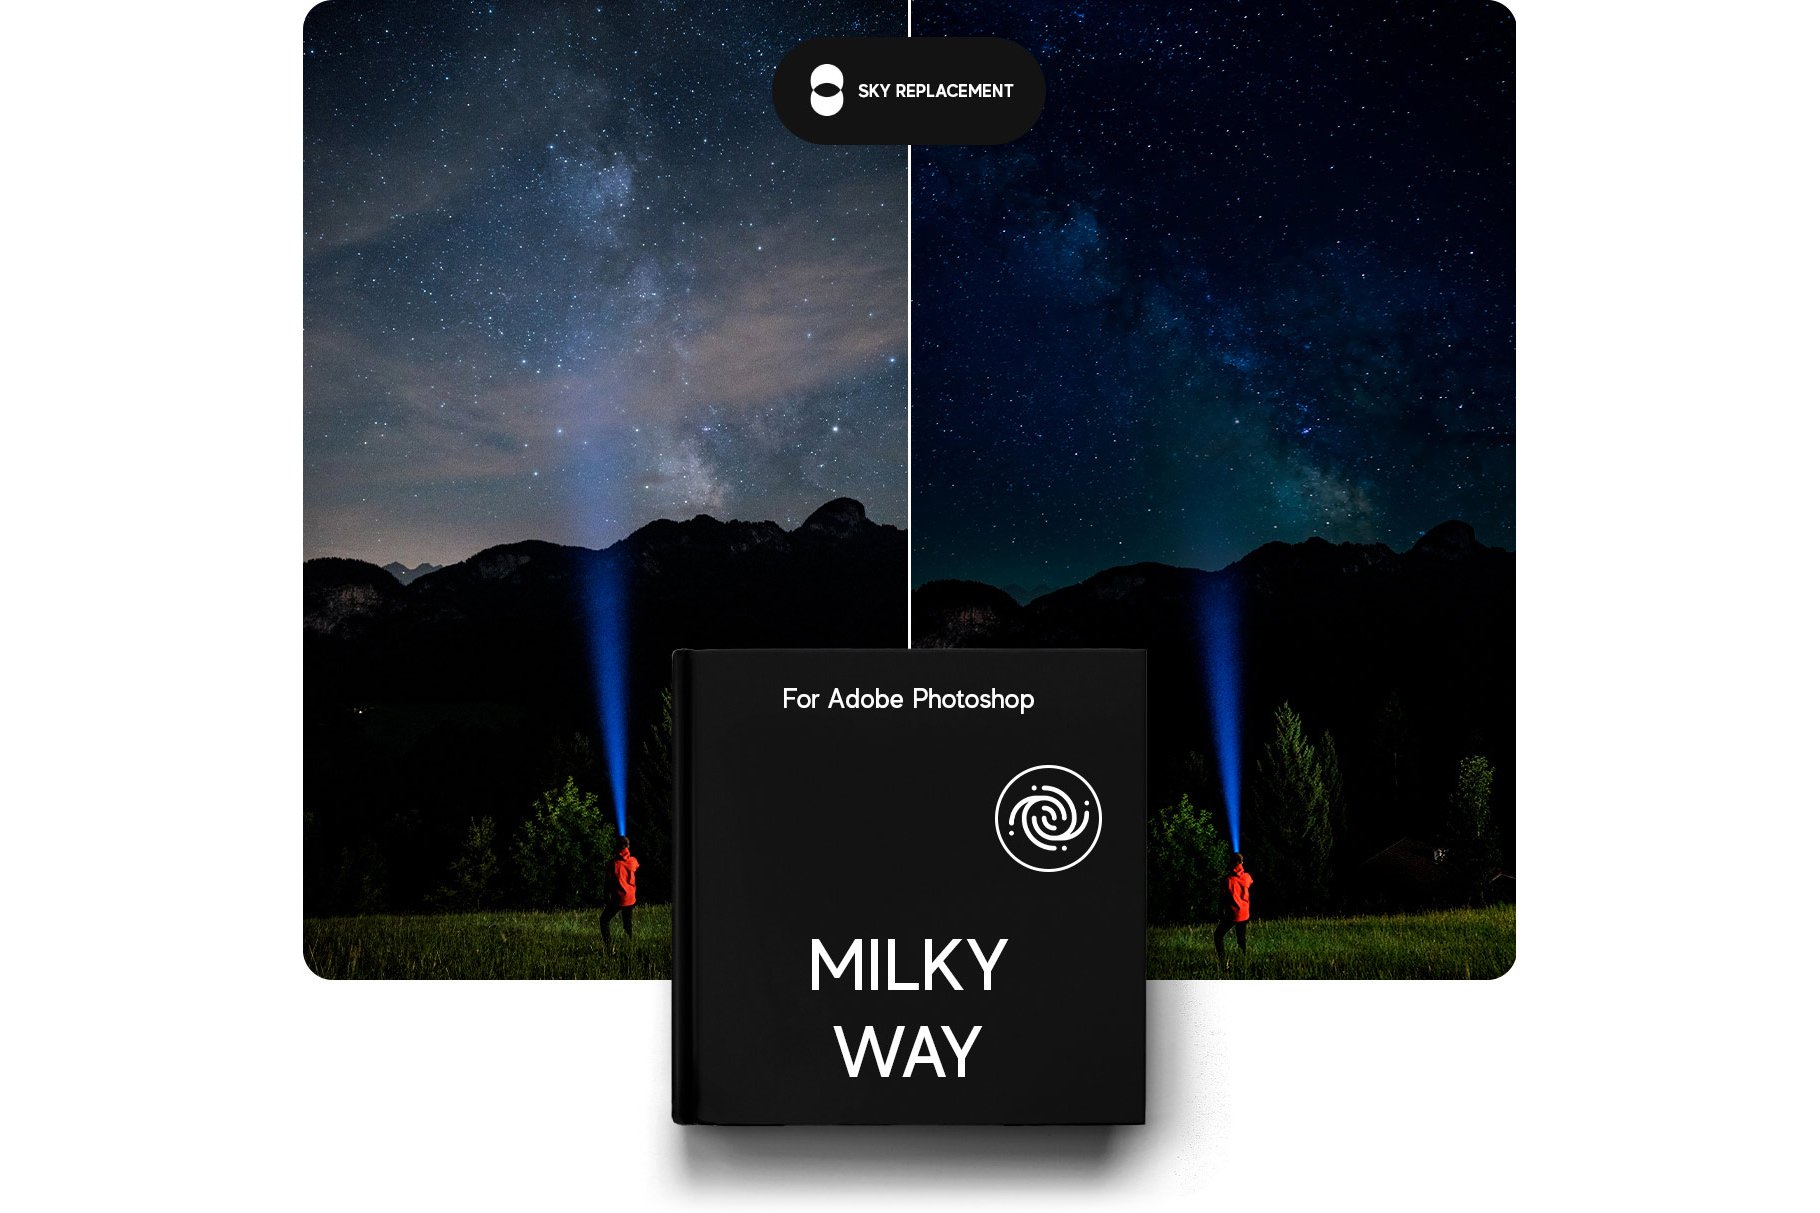 Milky Way Sky Replacement Packcover image.